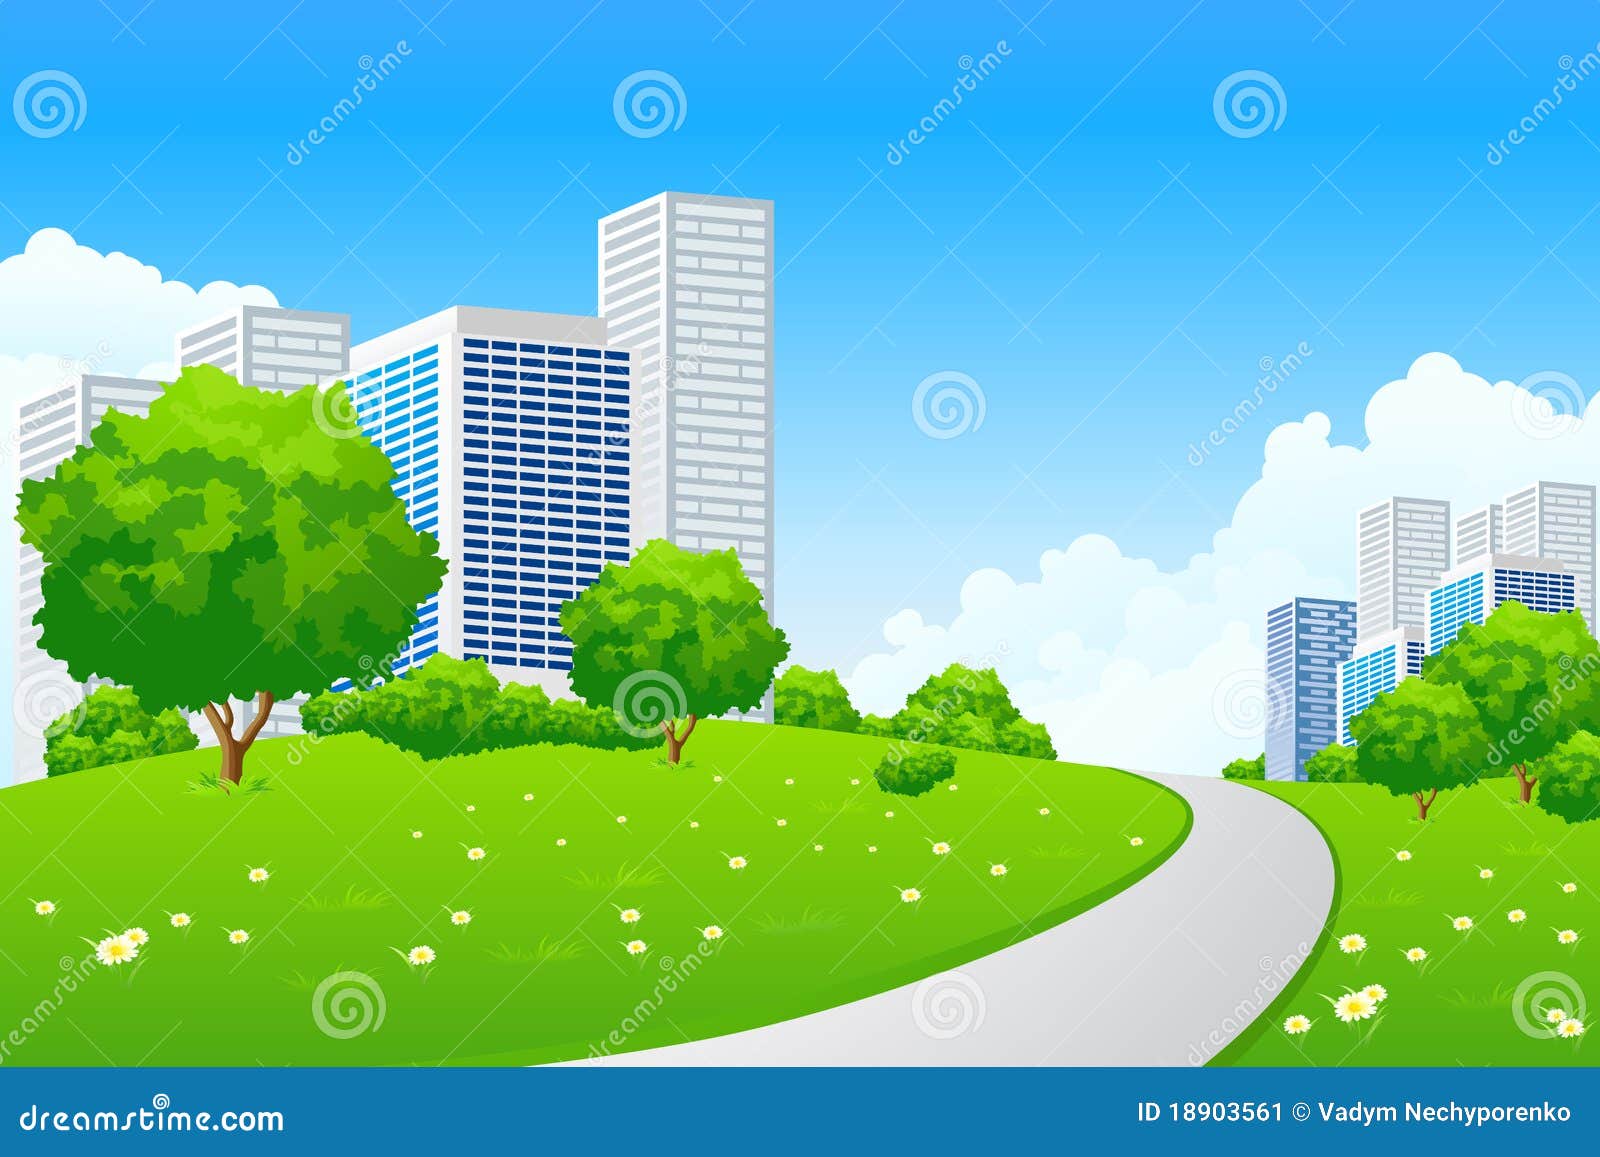 Green City Stock Illustration  Download Image Now  Sustainable Resources  City Environmental Conservation  iStock